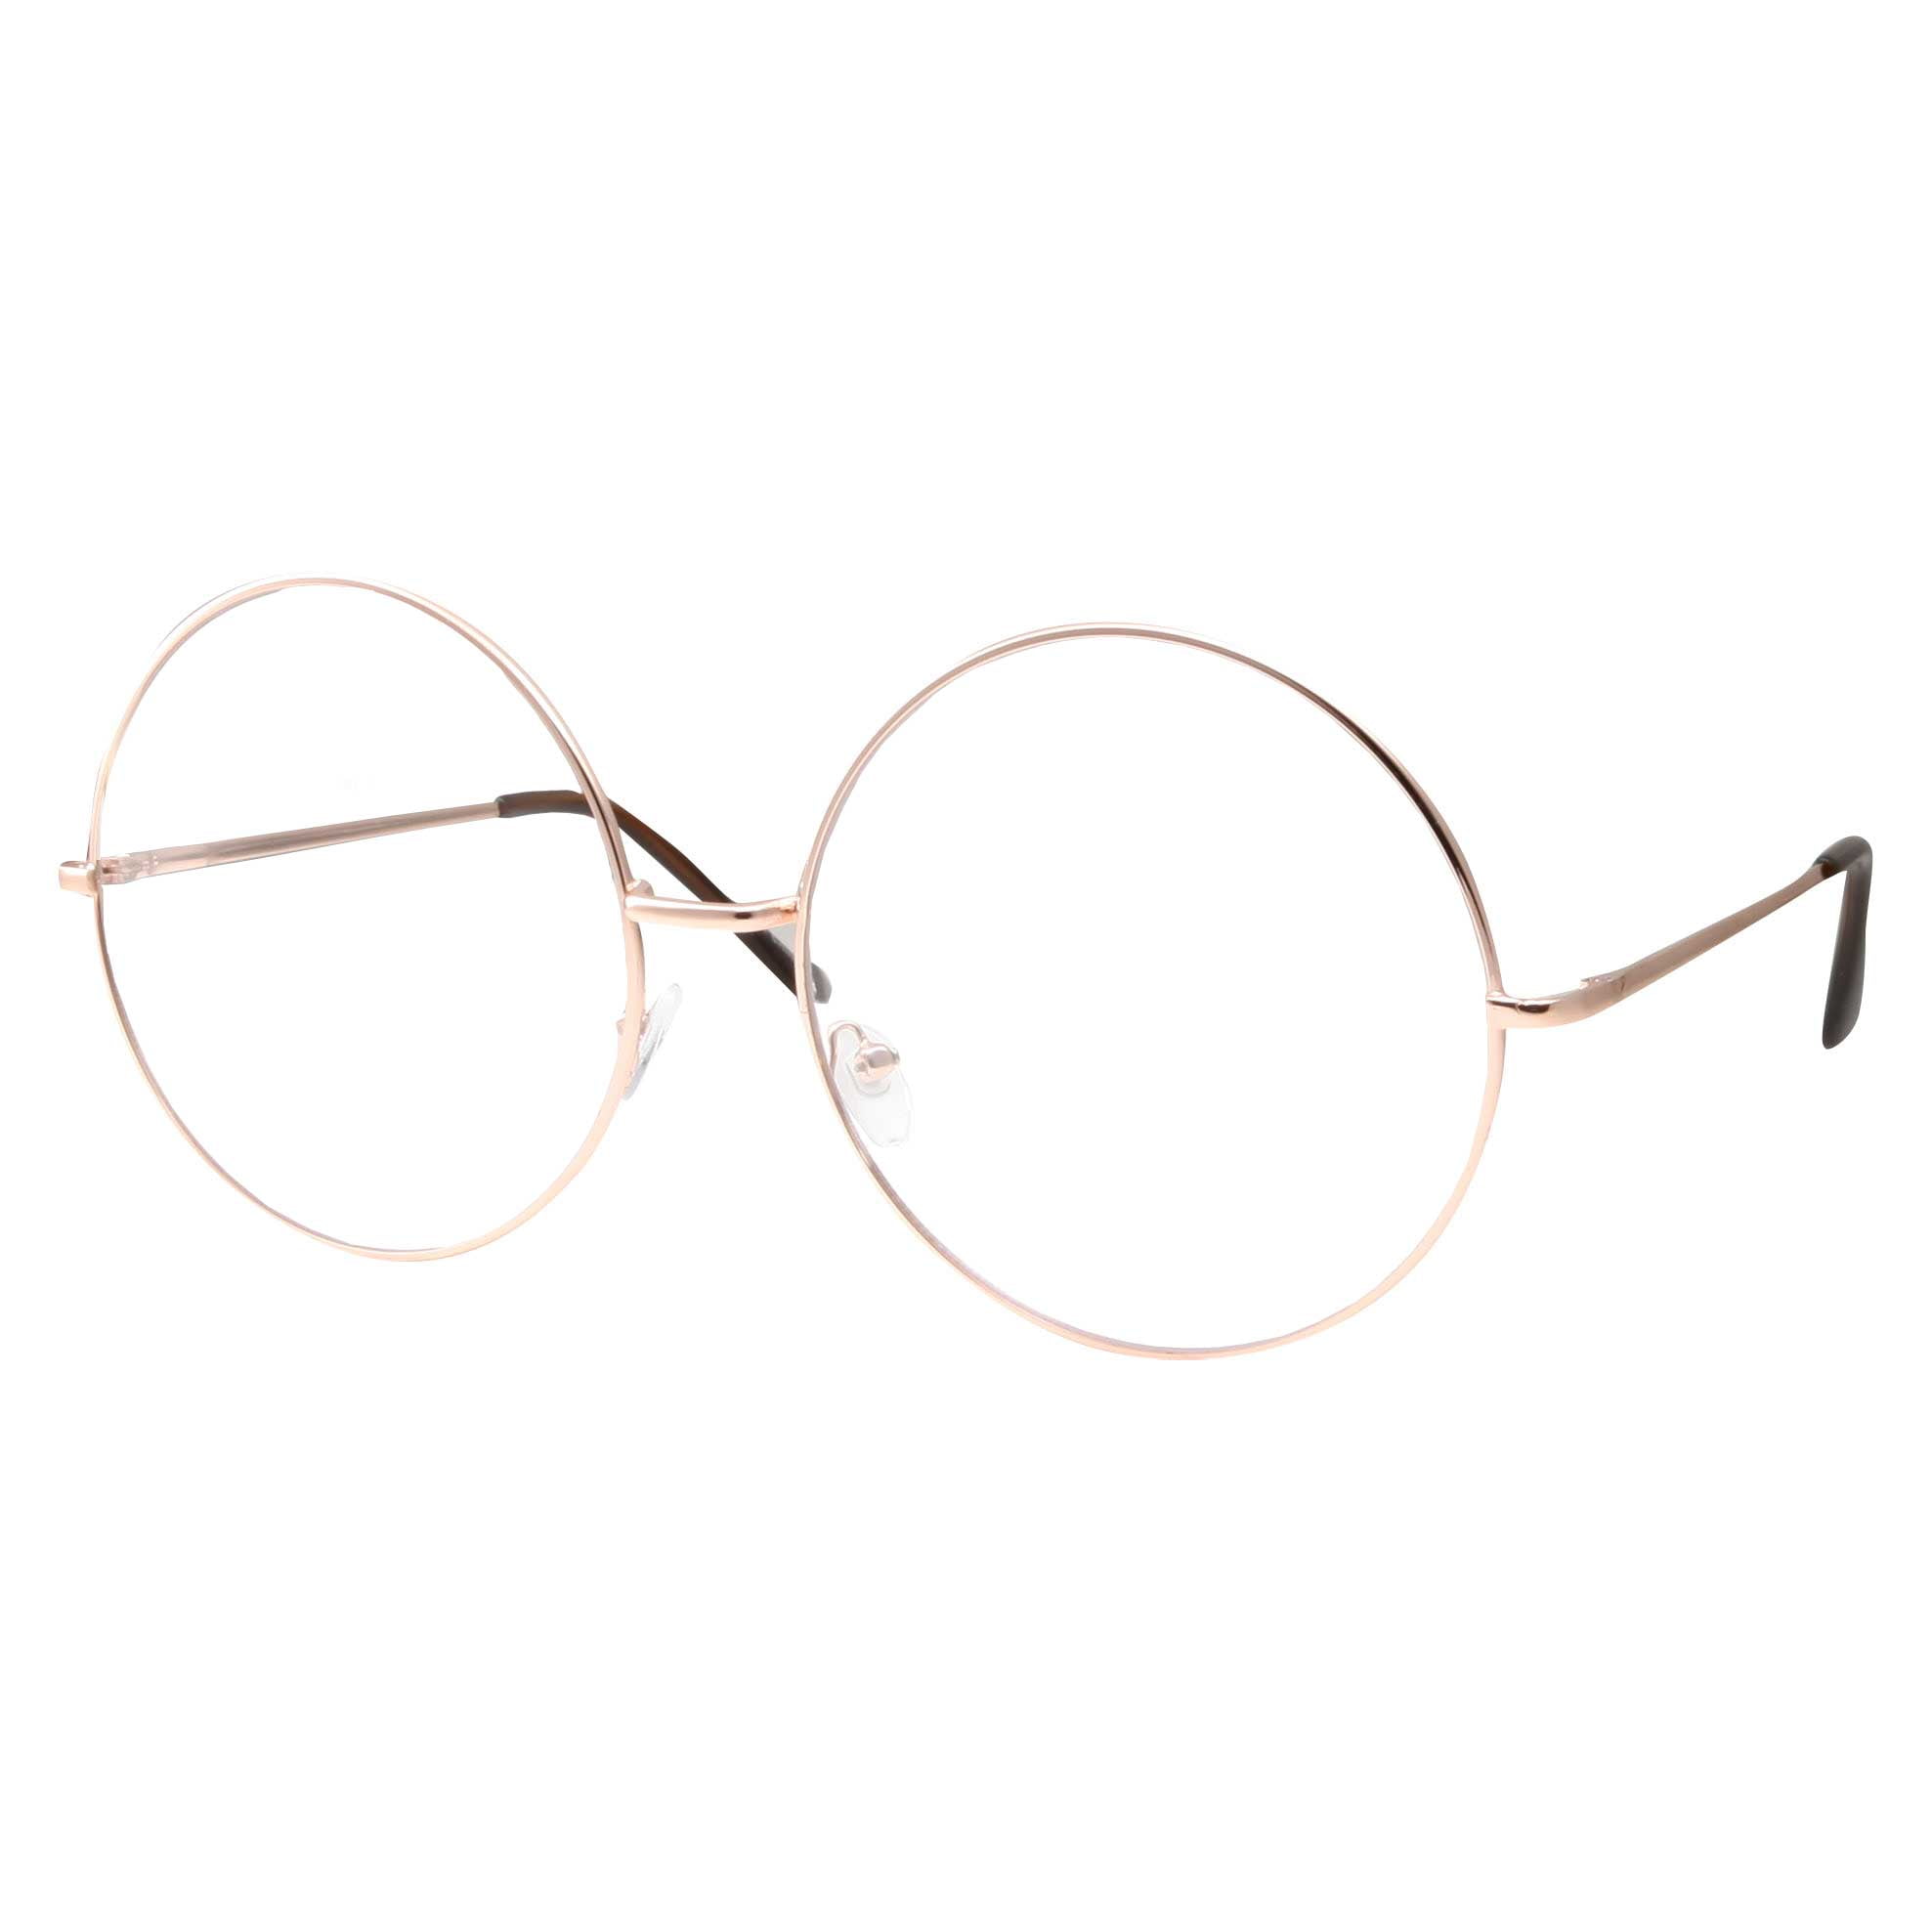 ROUND STYLE CLEAR LENS FASHION GLASSES WITH GOLD OR BLACK FRAME 100% UV400 